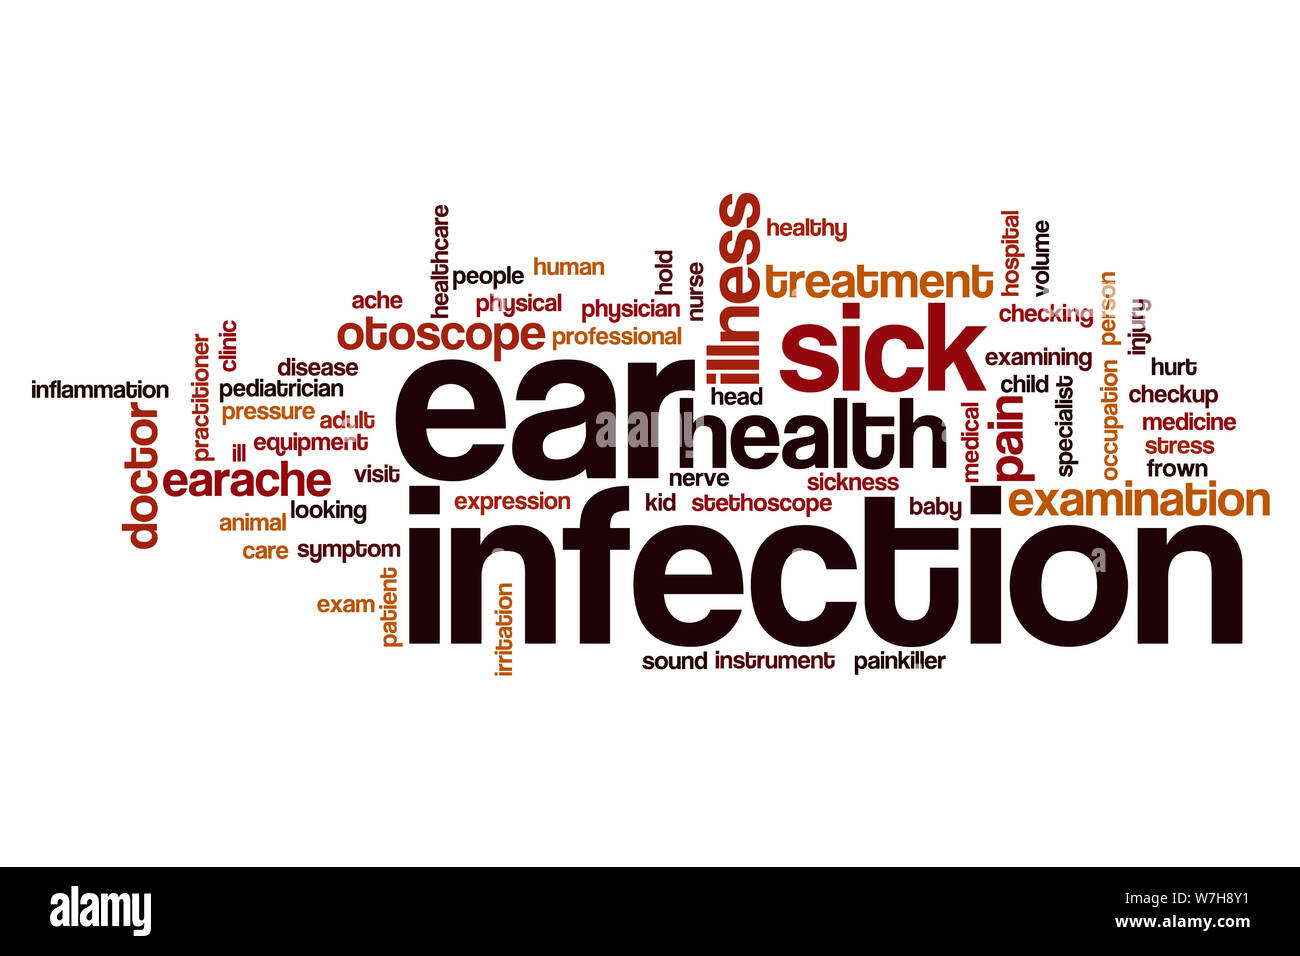 Ear infection word cloud concept Stock Photo